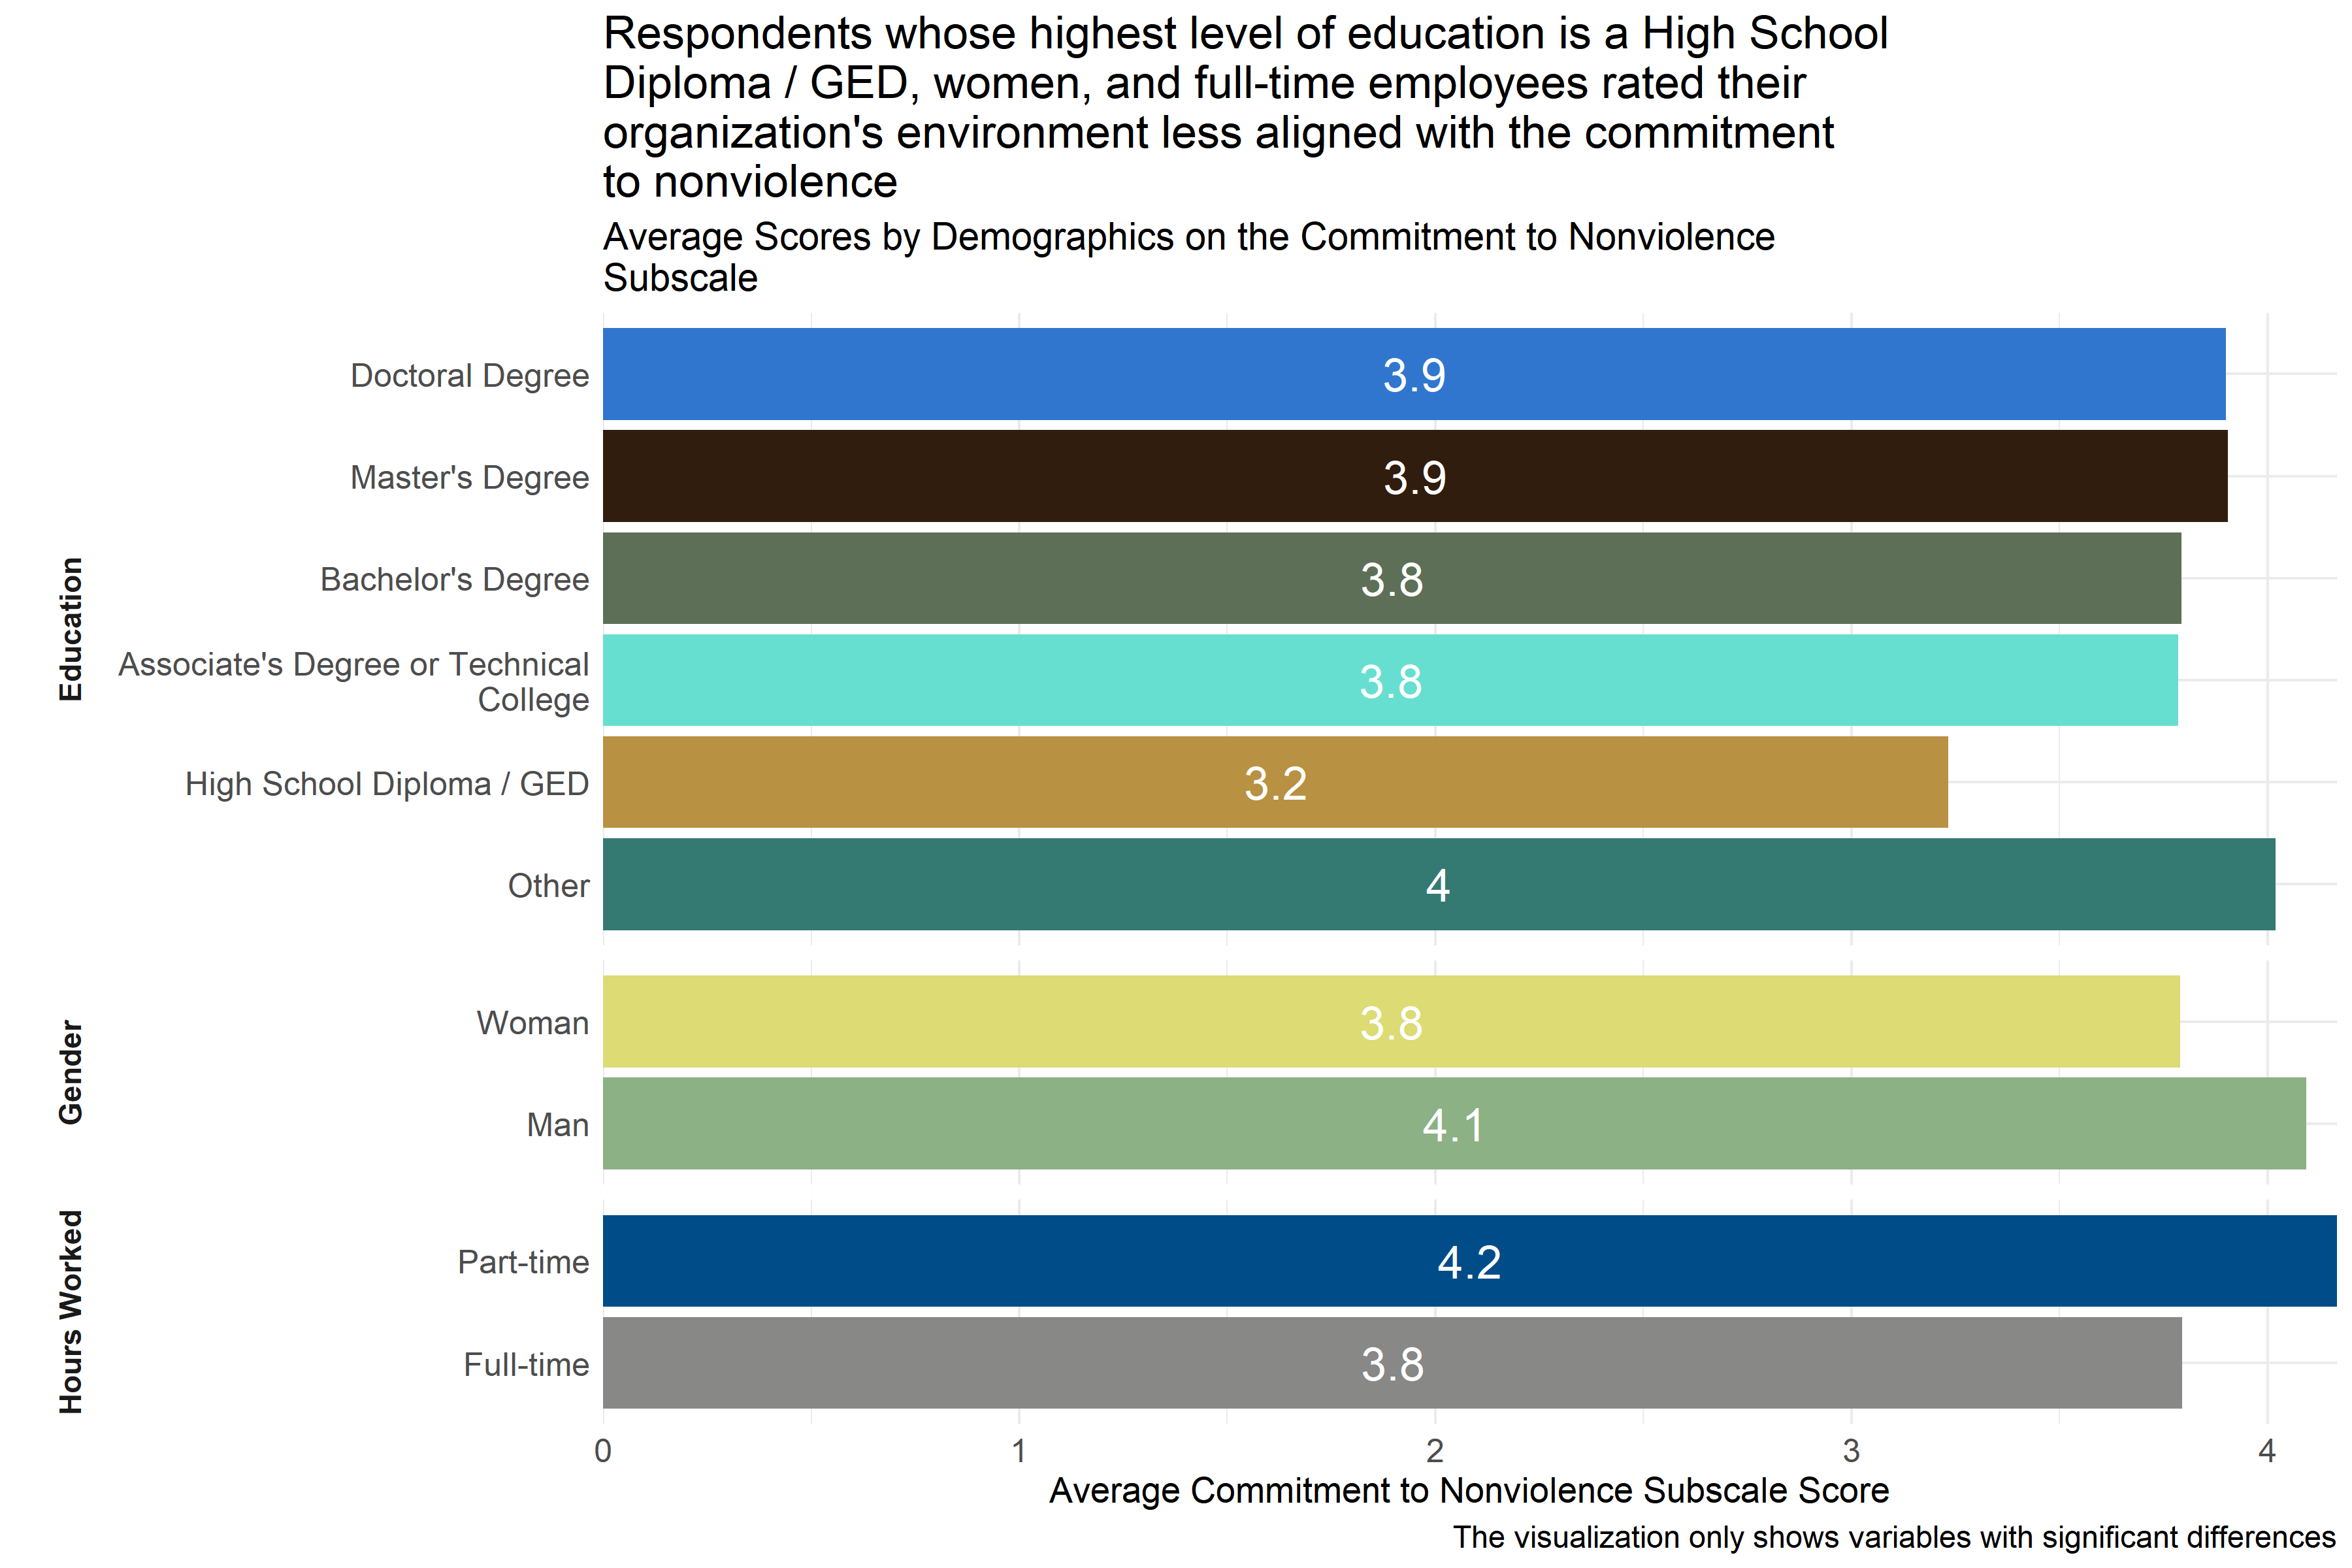 Average scores for Commitment to Nonviolence Subscale across demographic groups